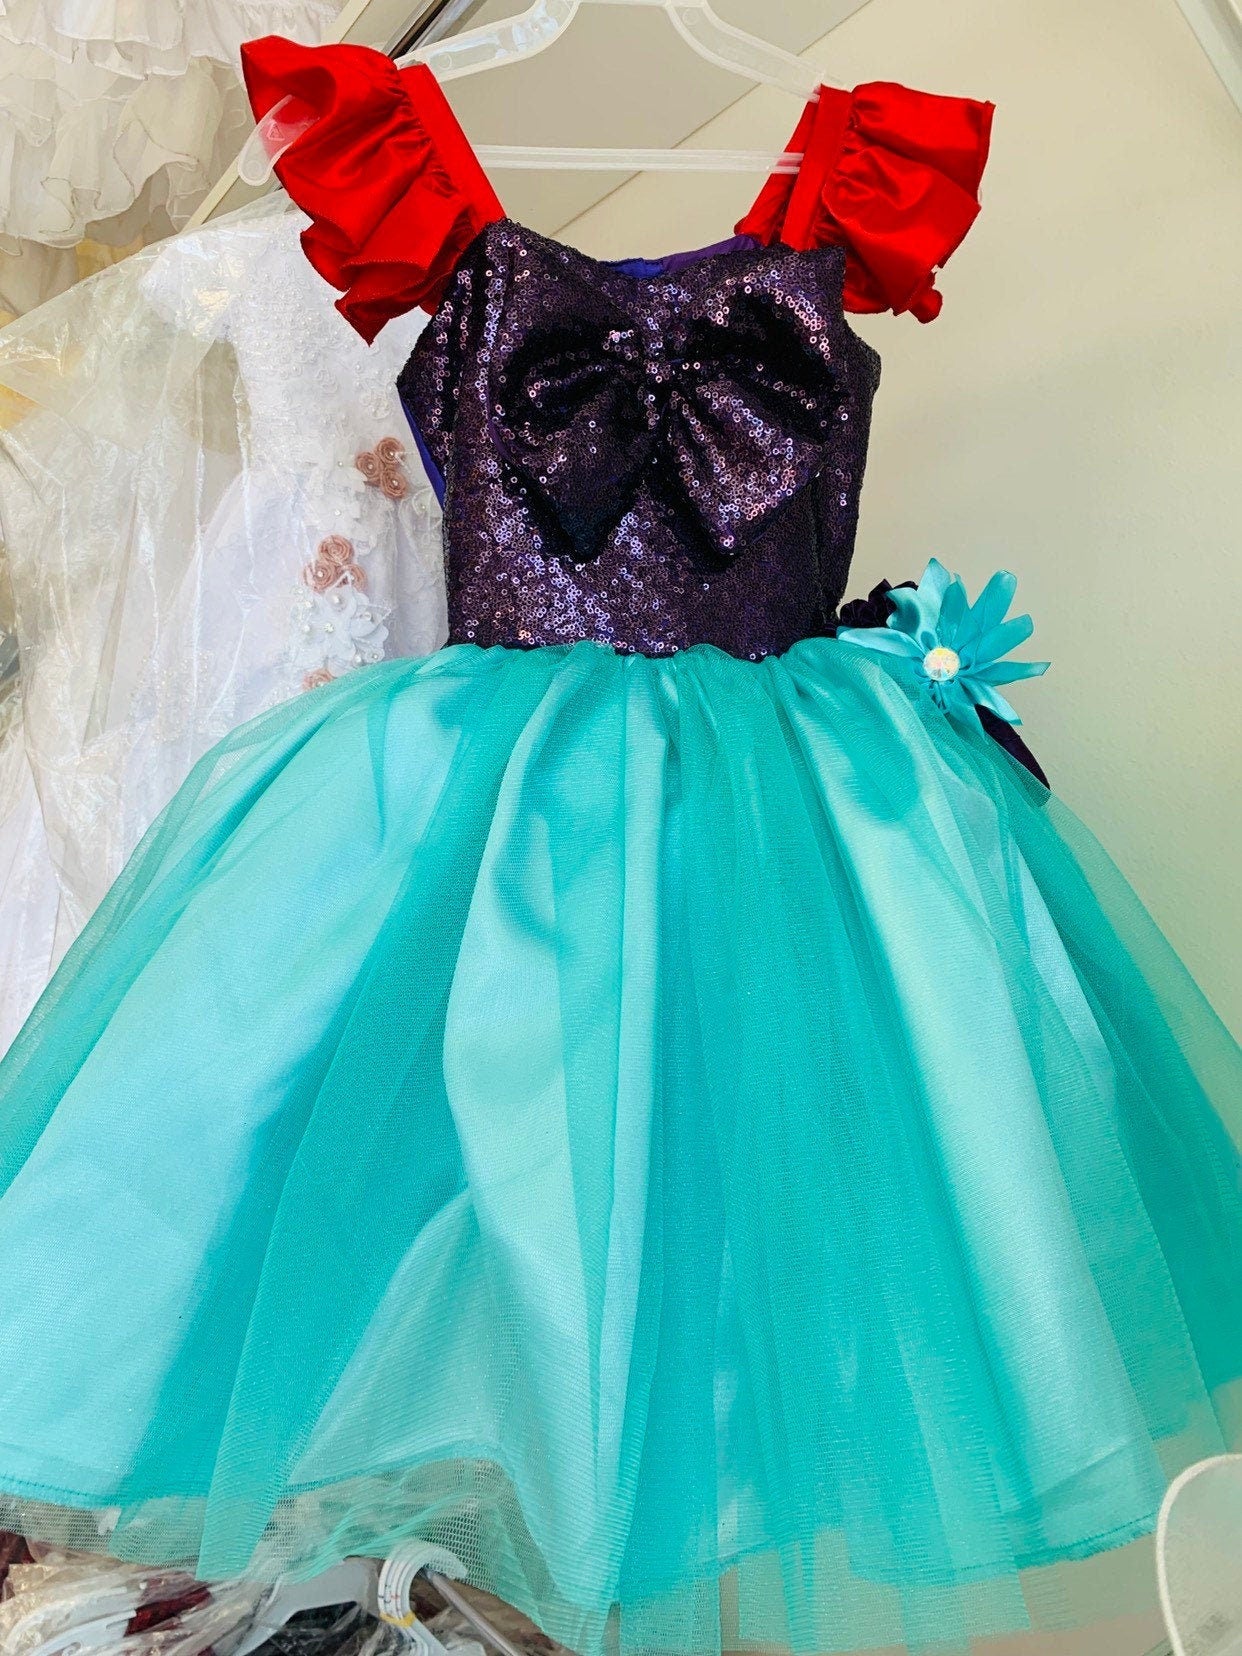 Emma's Magical Dream, Merimaid Tutu Dress, sequin top with teal tulle tutu bottom, with red ruffle sleeves